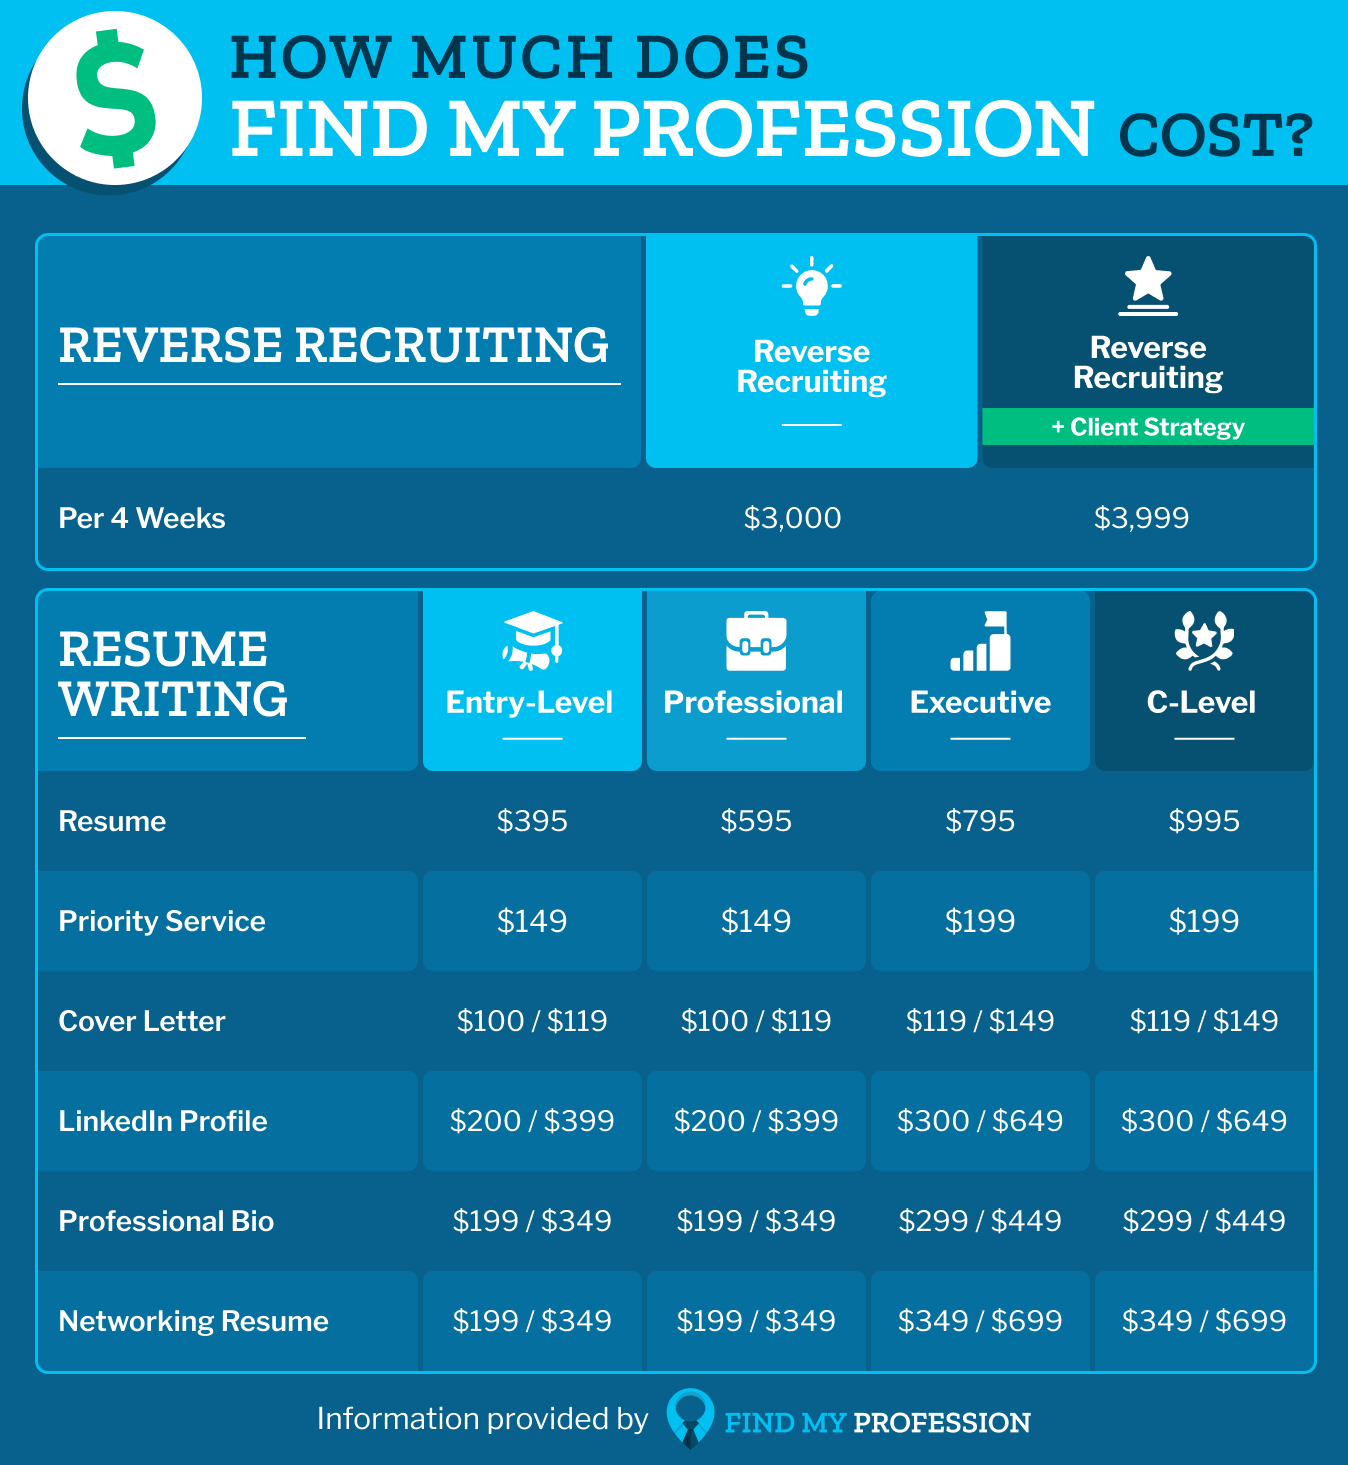 How Much Does Find My Profession Cost?